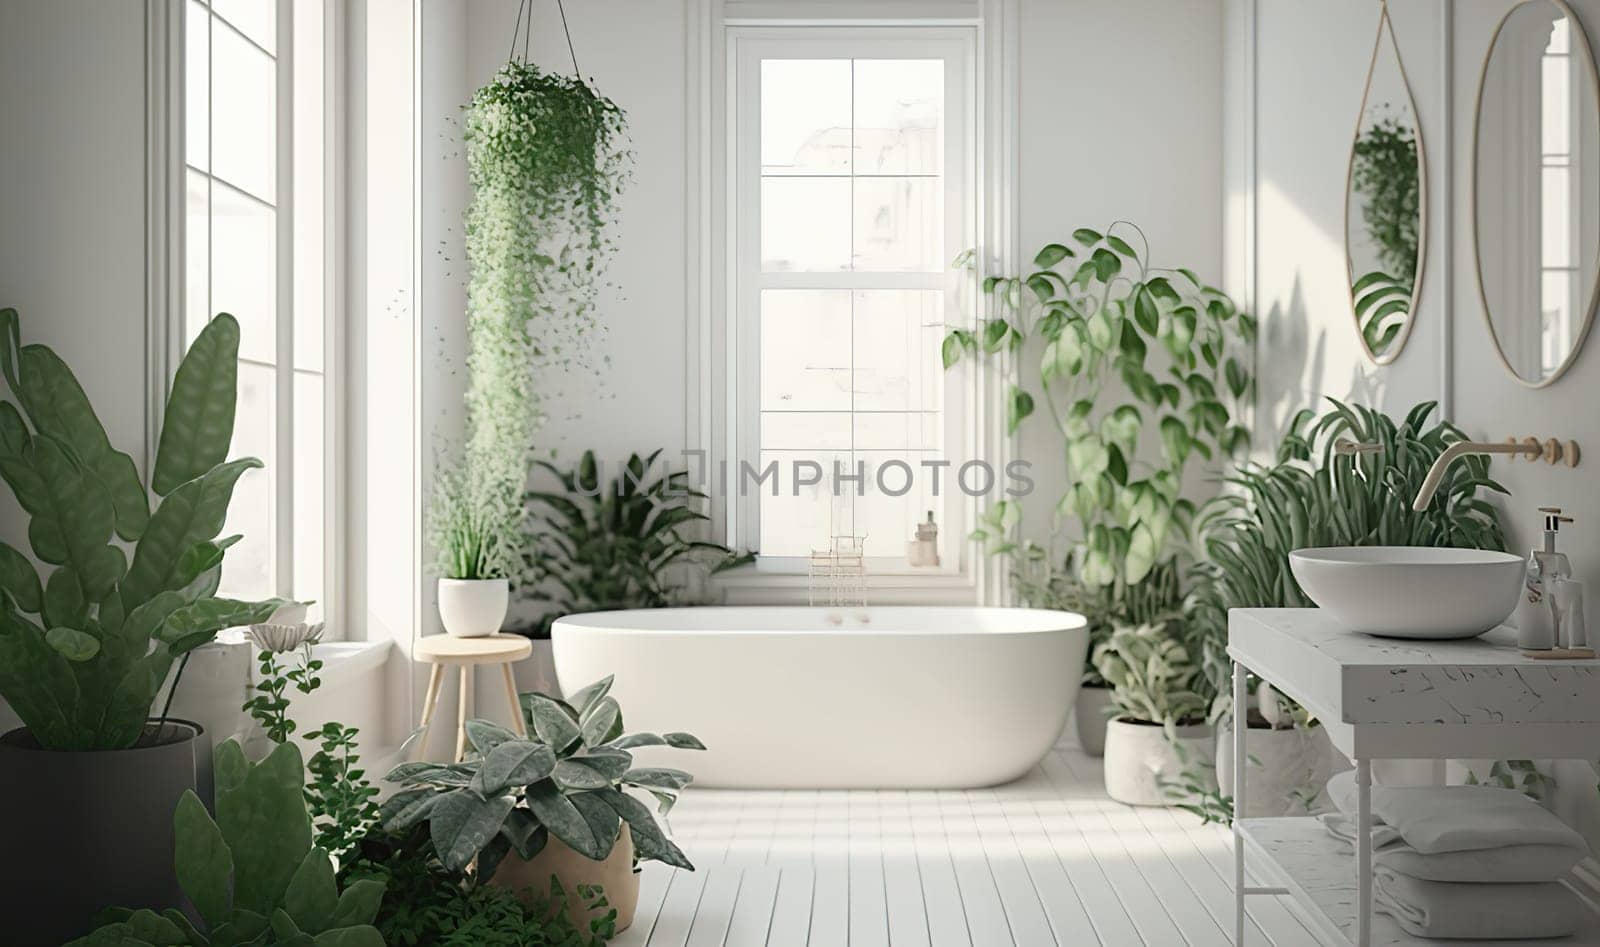 Soft native organic shapes look of bathroom with big window oval bathtub with lights and Green palm plants in selfcare wellness luxury living by Jyliana